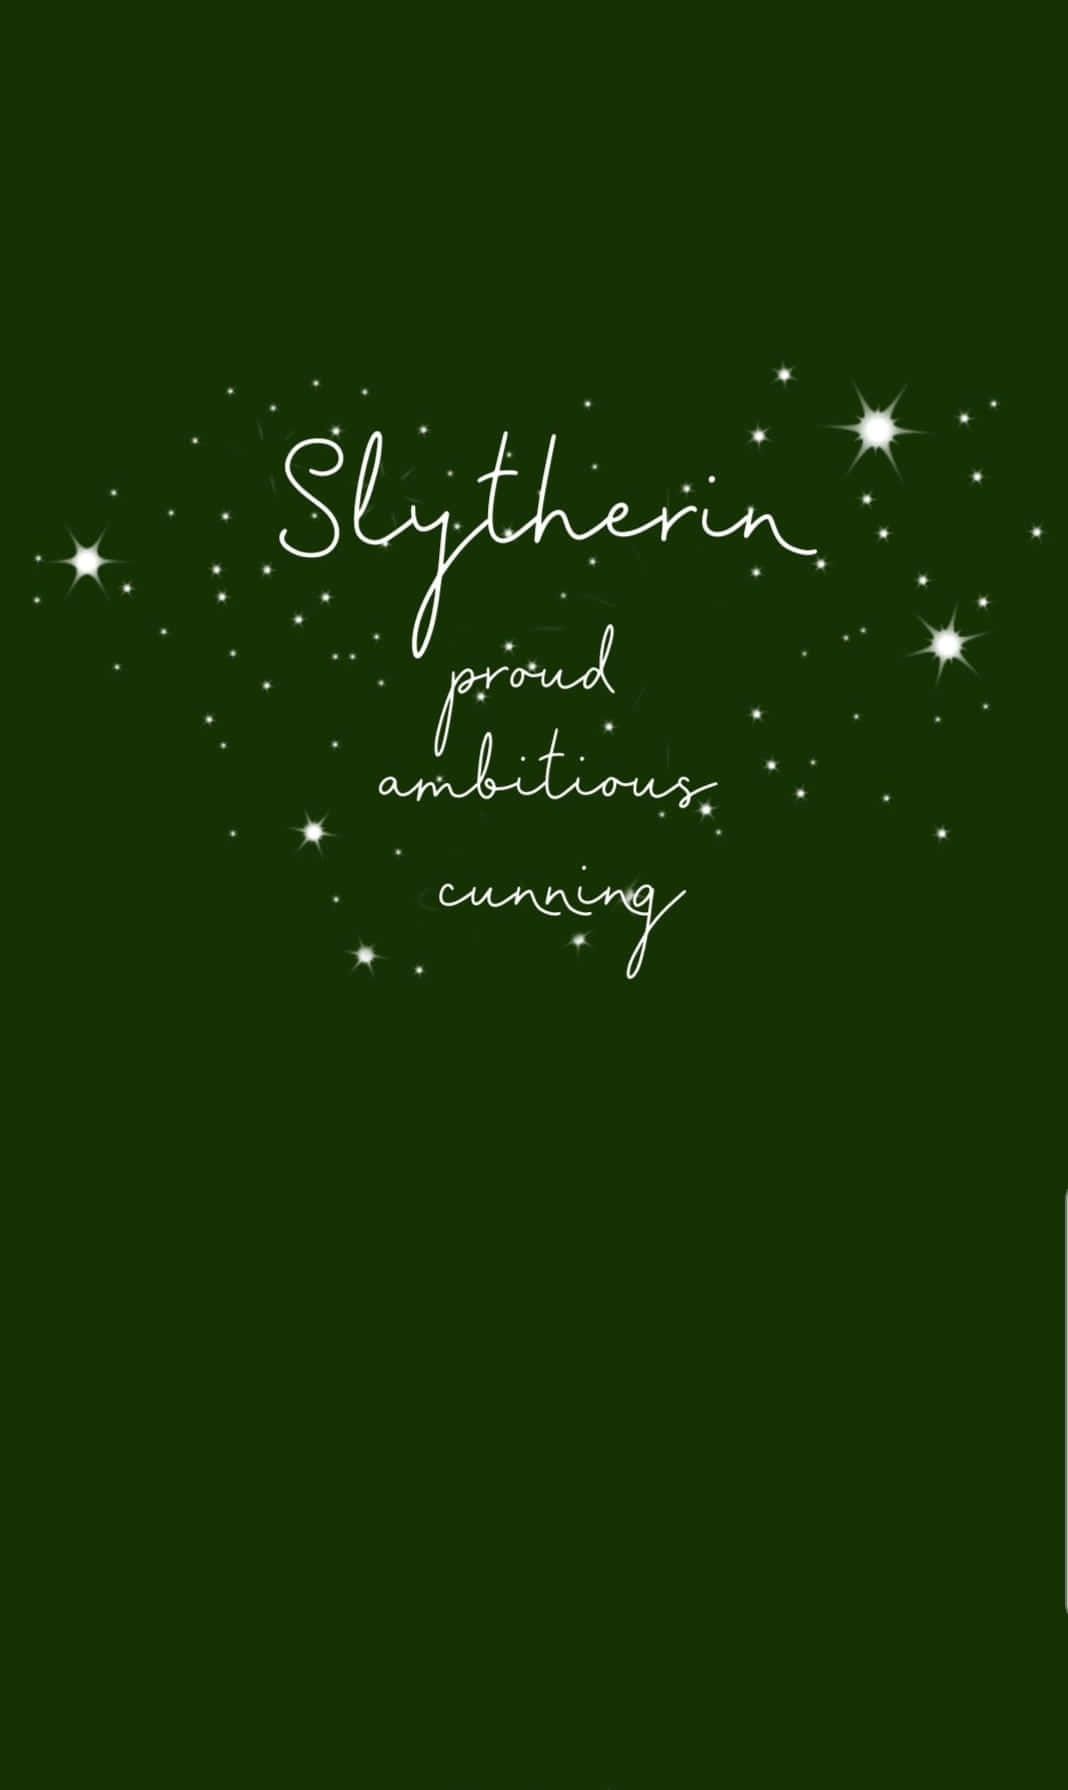 Join the House of Slytherin